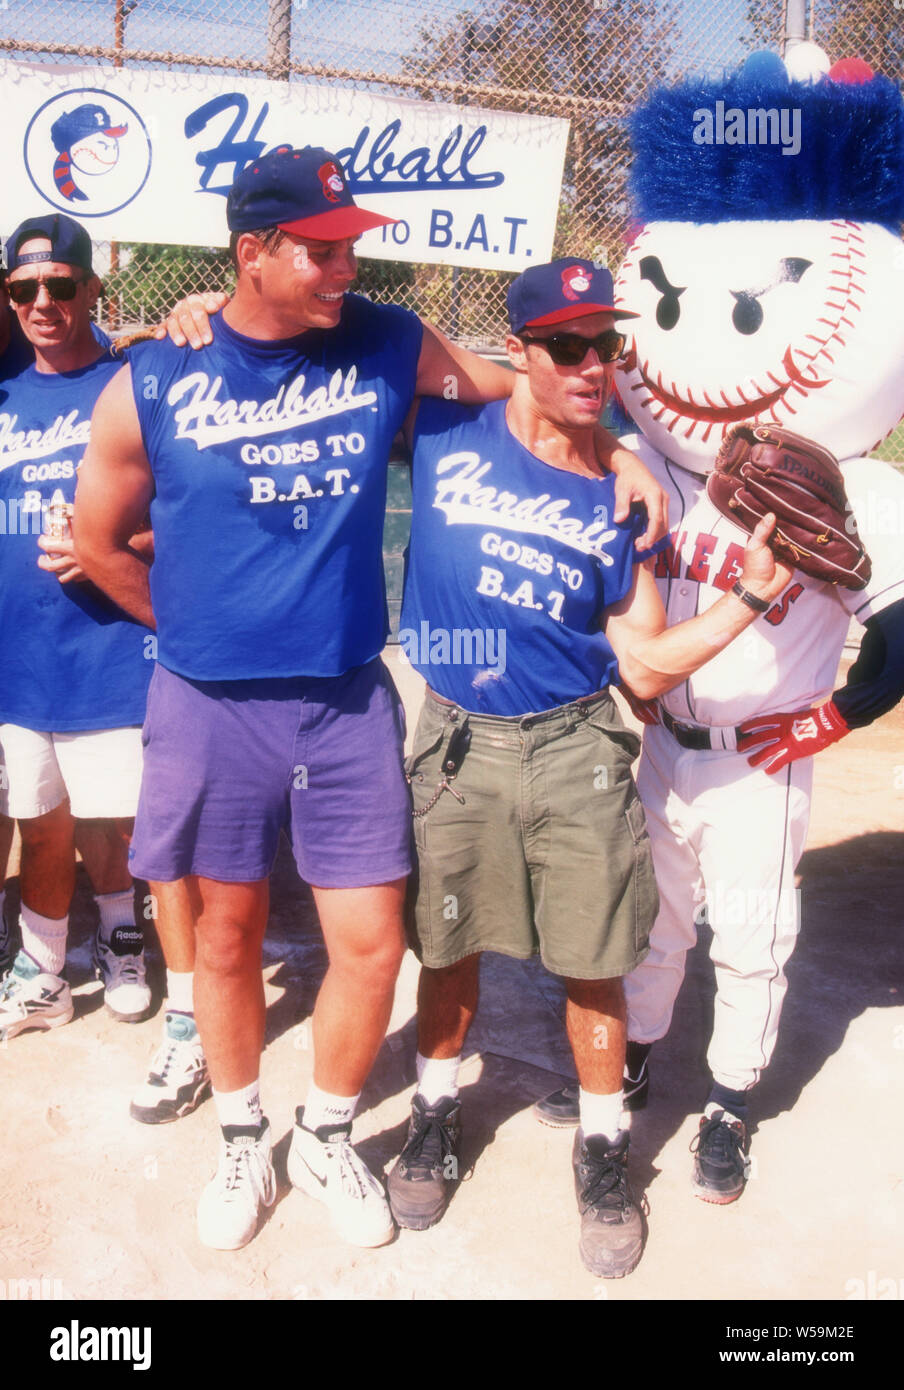 Los Angeles, California, USA 12th October 1994 Actor Chris Browning and Comedian/actor Joe Rogan attend Hardball Goes To B.A.T. baseball game on October 12, 1994 in Los Angeles, California, USA. Photo by Barry King/Alamy Stock Photo Stock Photo